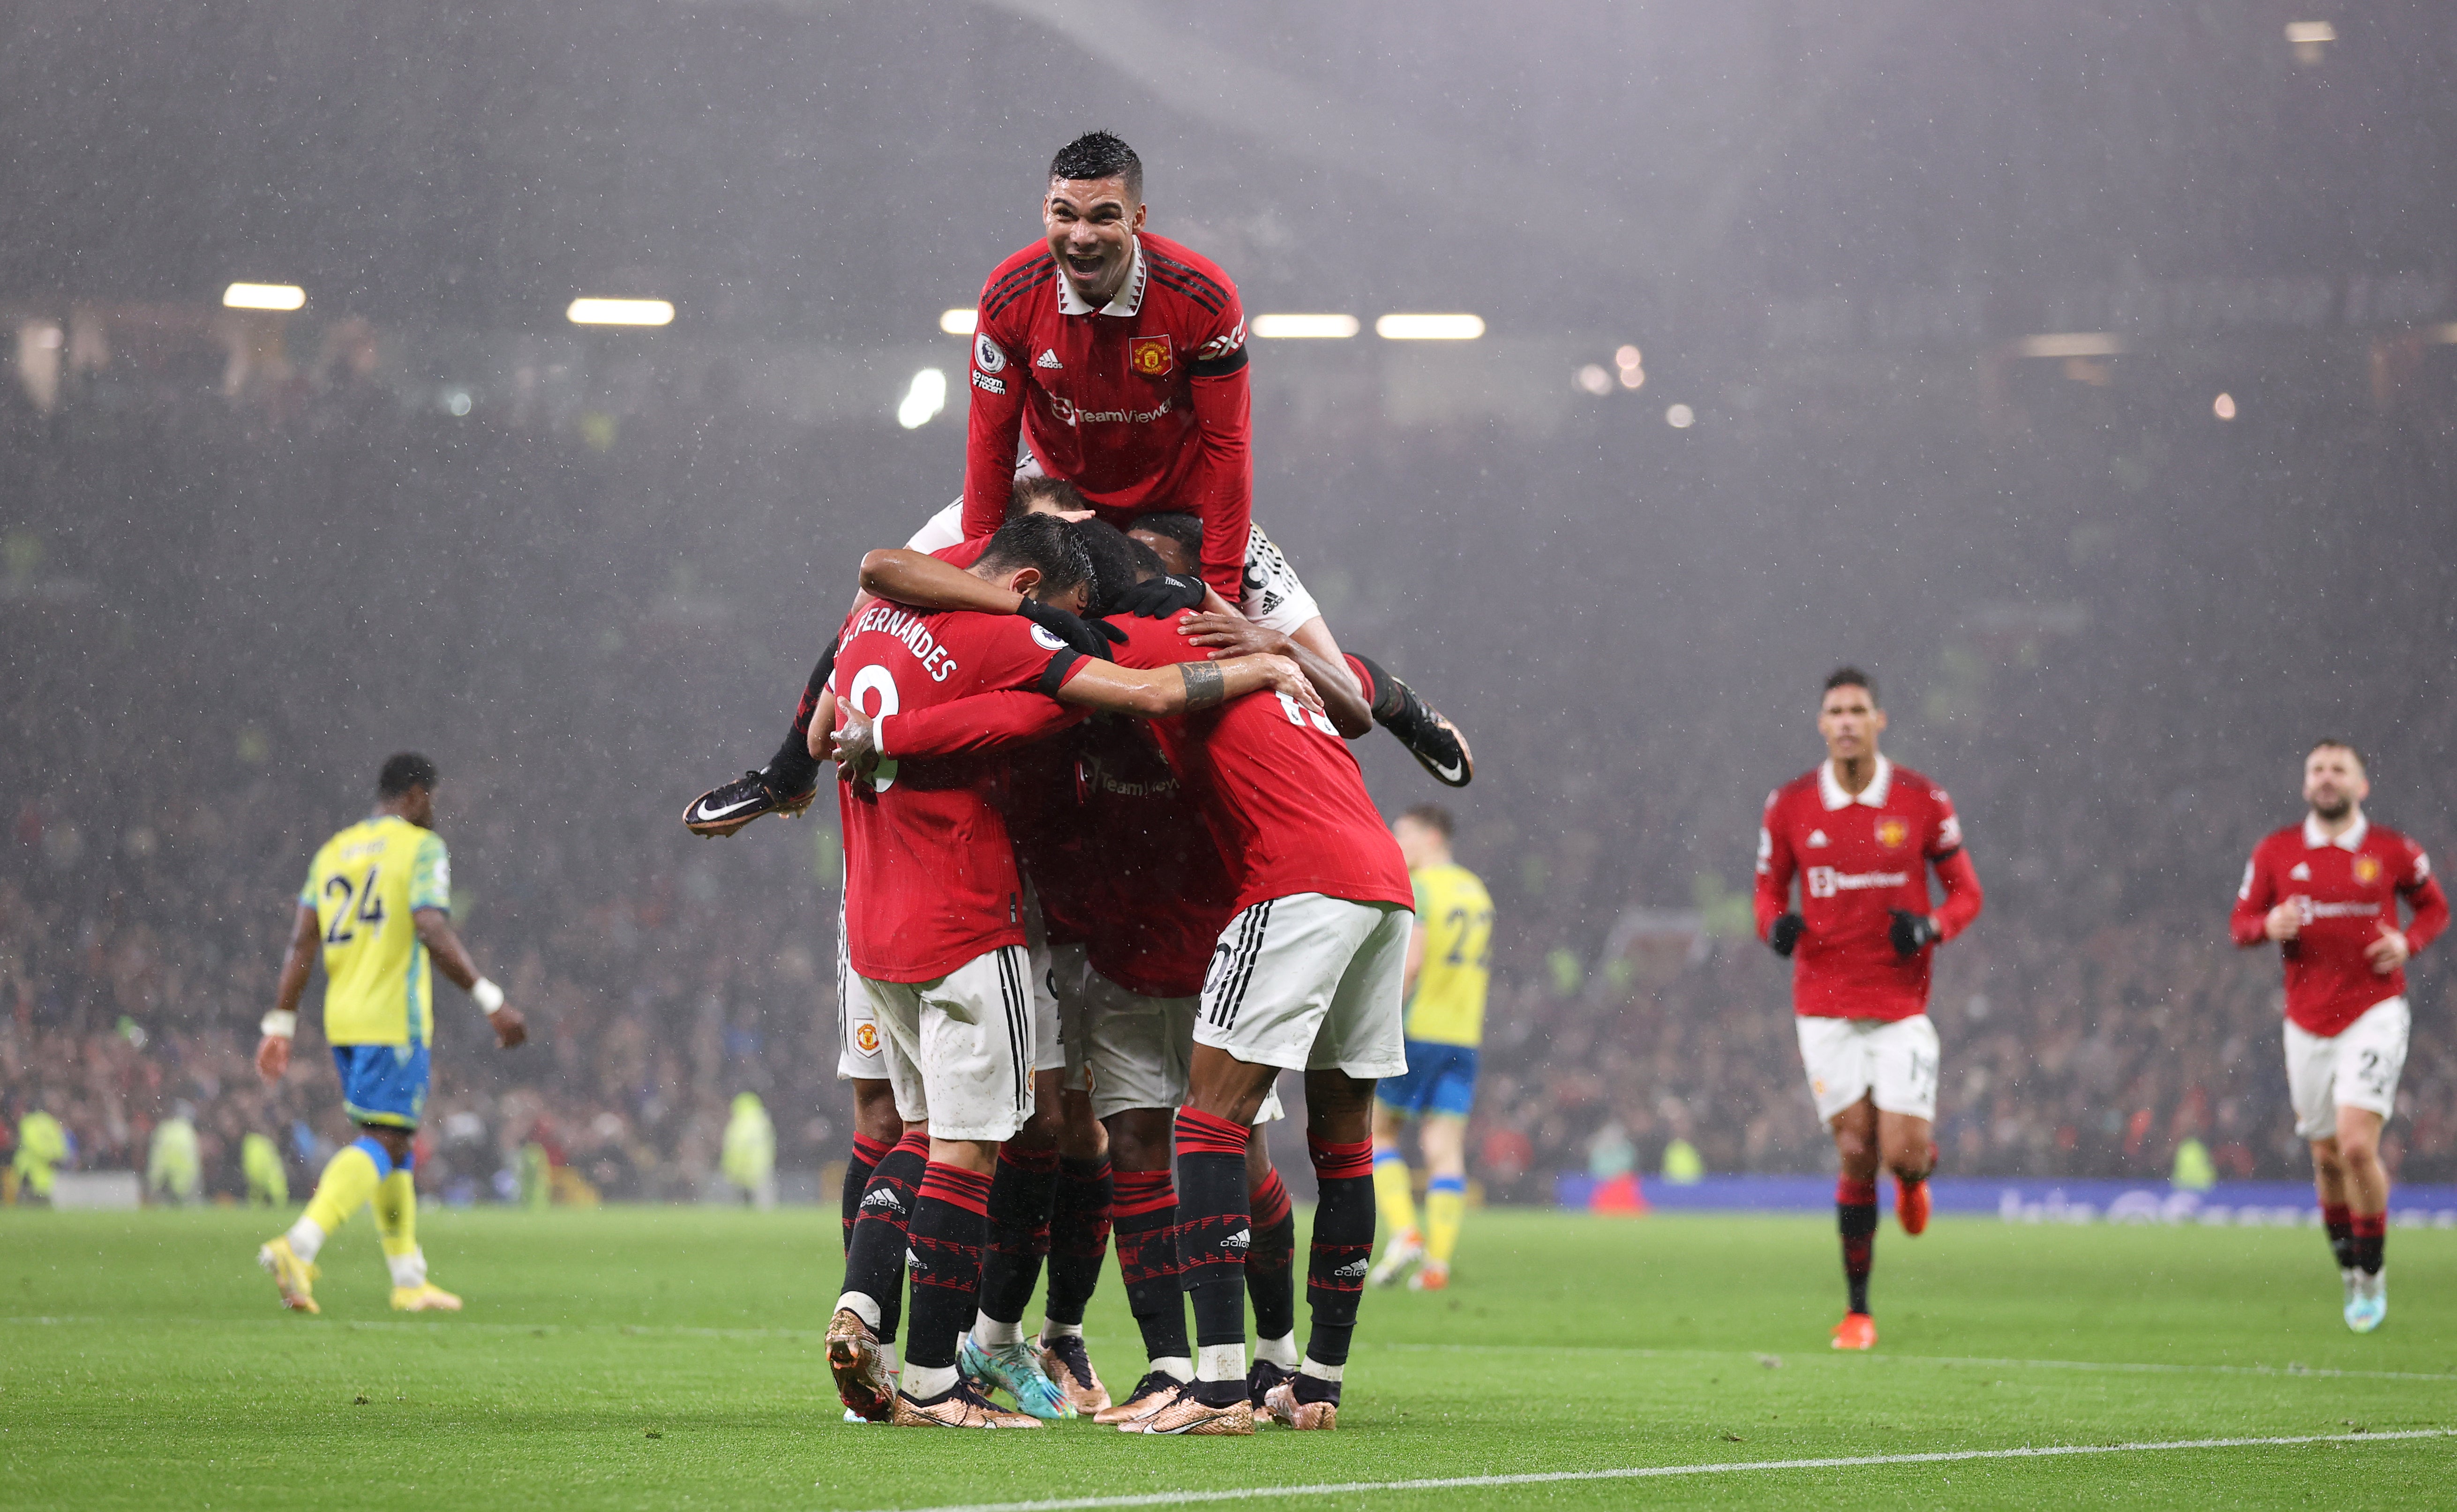 Man Utd cruised to victory over Nottingham Forest